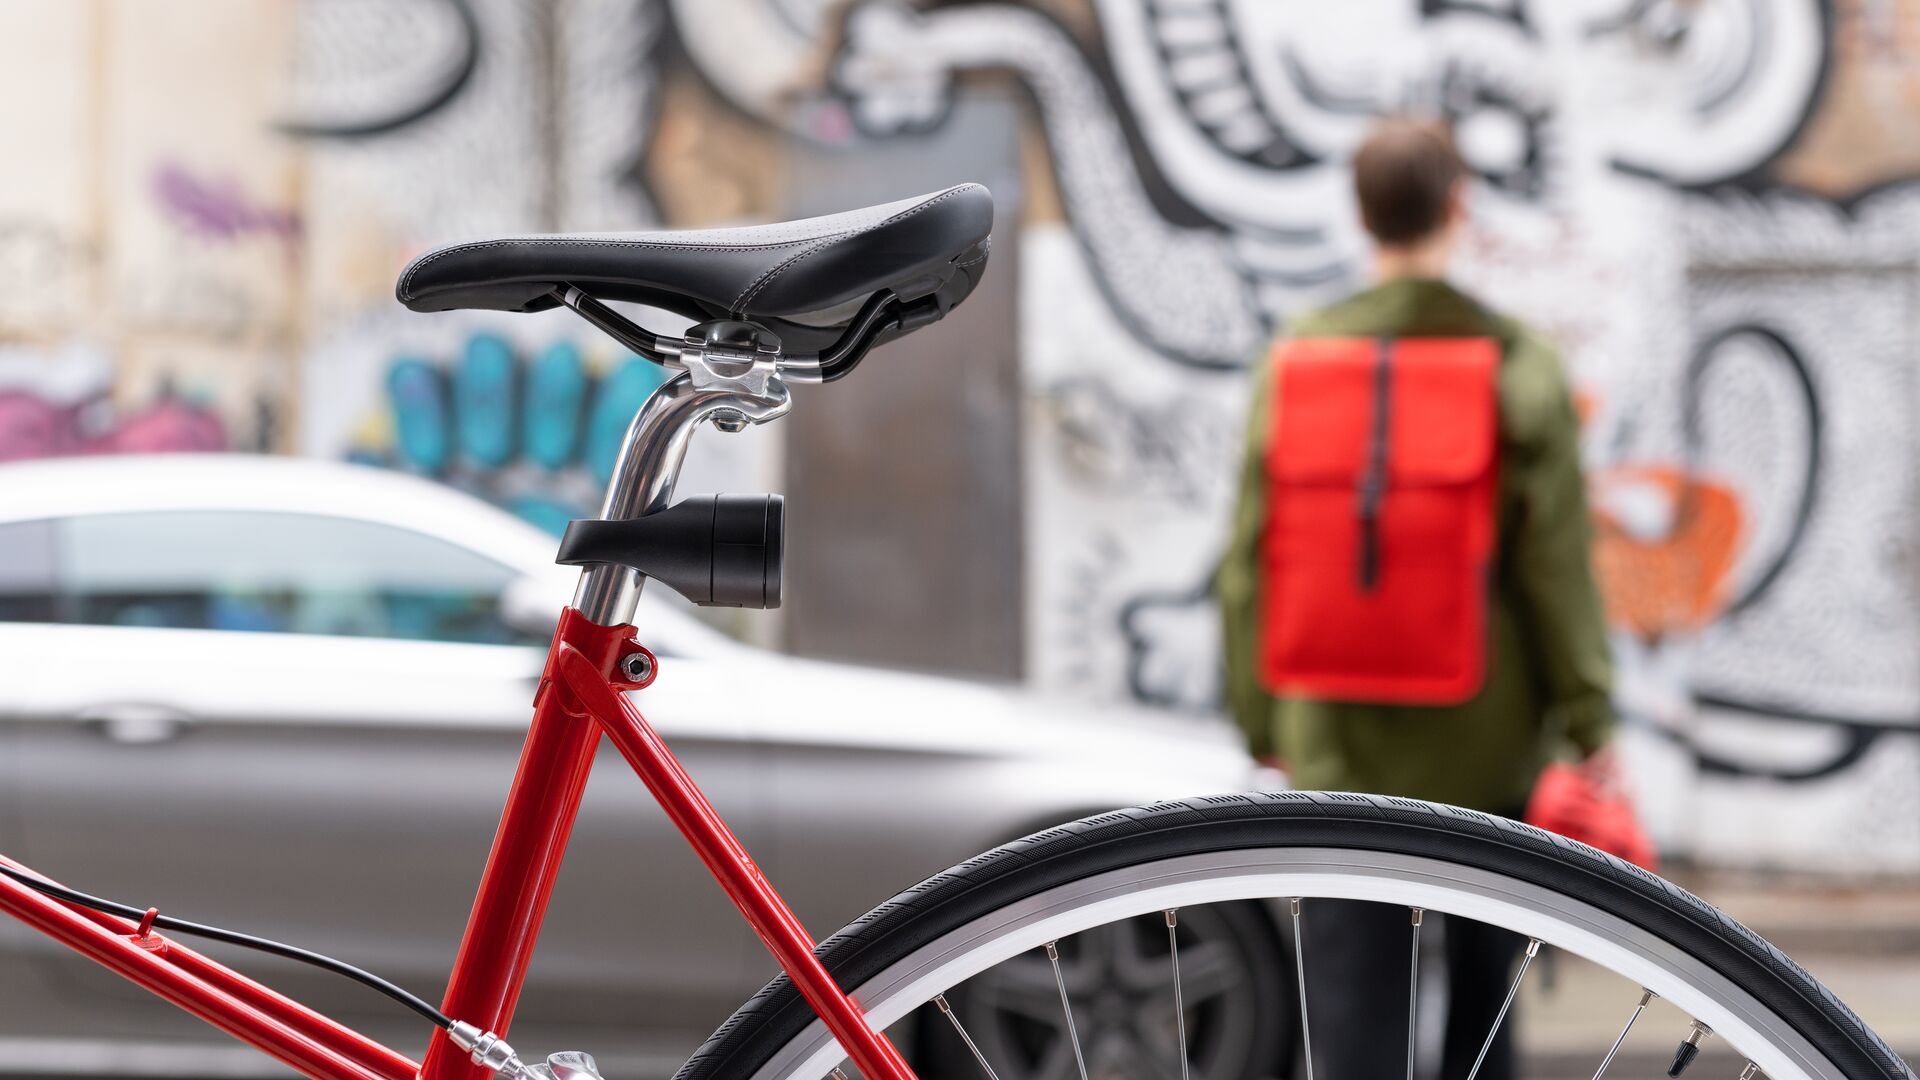 an image of the Vodafone Curve Bike tracker on a bicycle with a cyclist walking away into the background